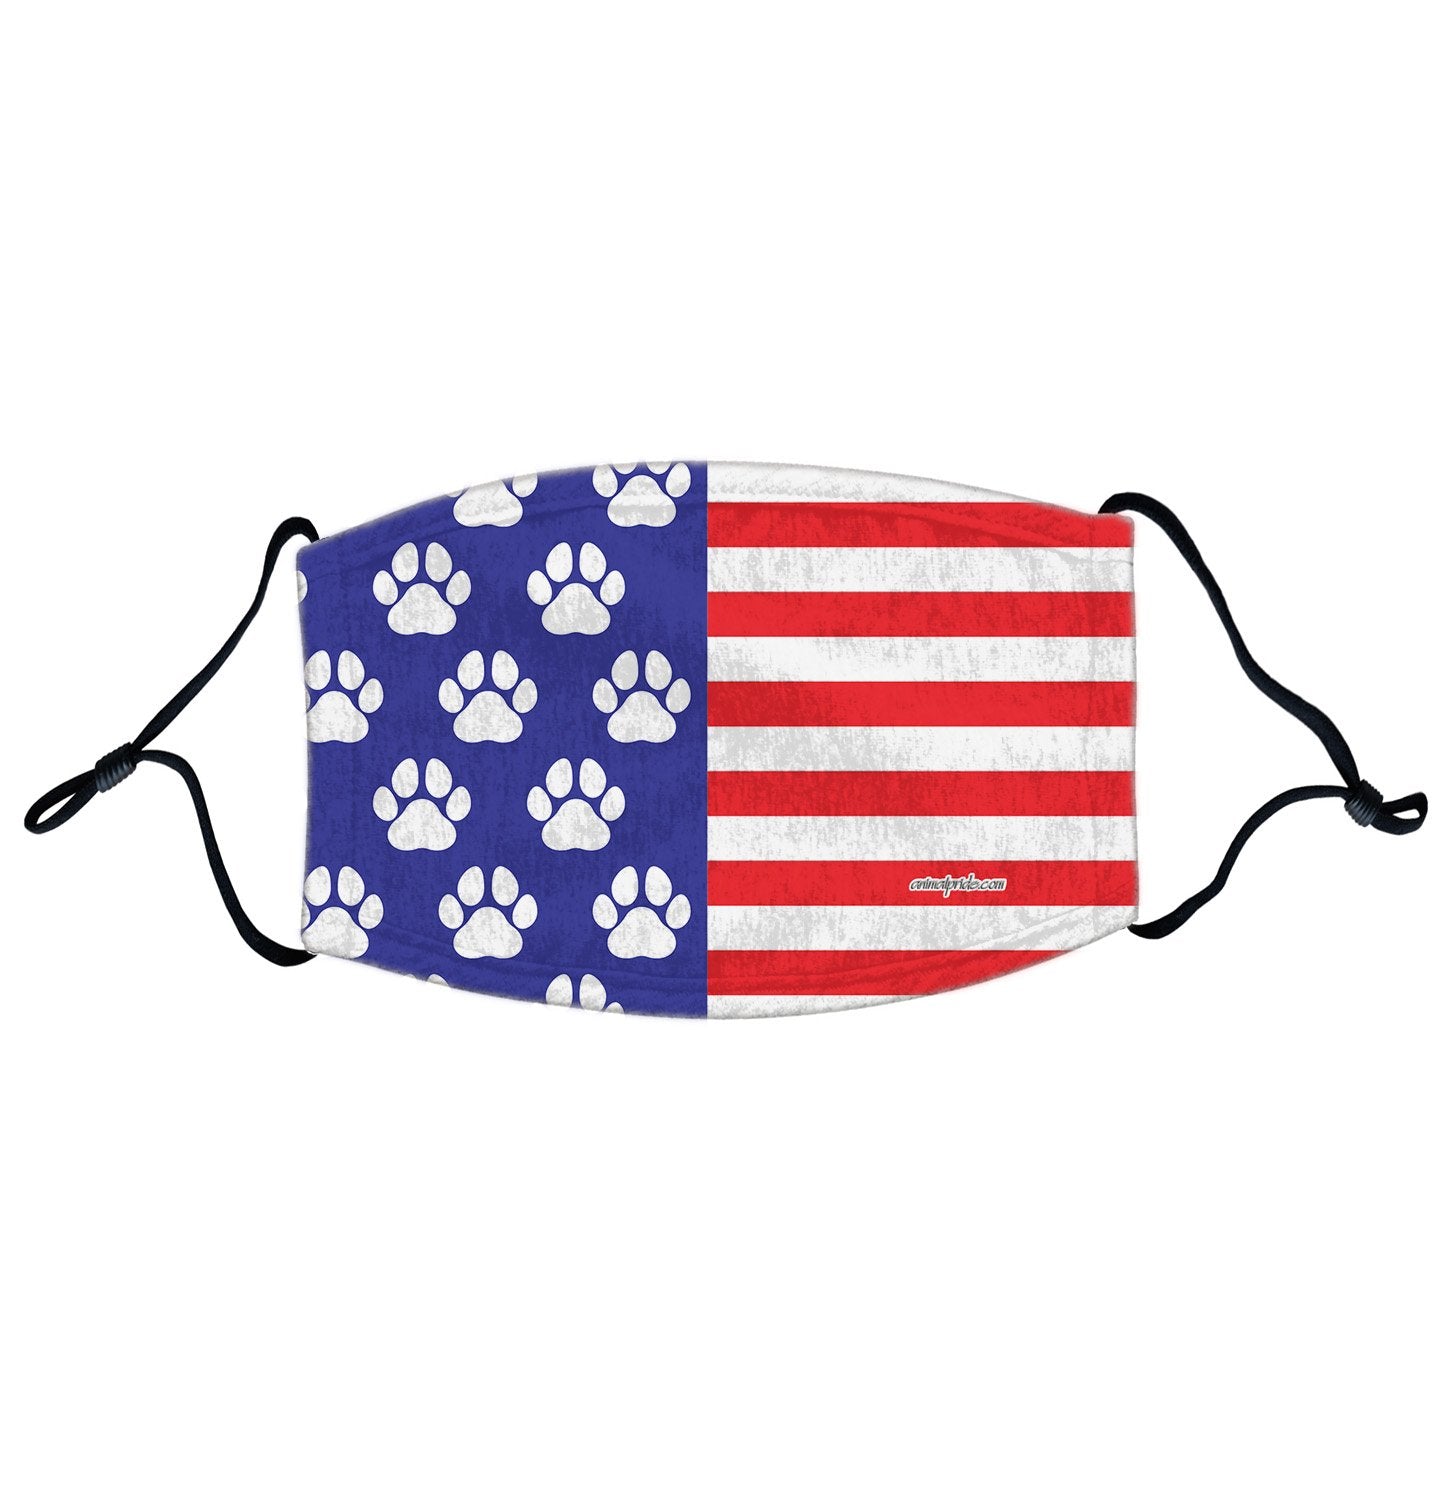 USA Flag - White Paw Prints - Adjustable Face Mask, Breathable, Reusable, Printed in USA